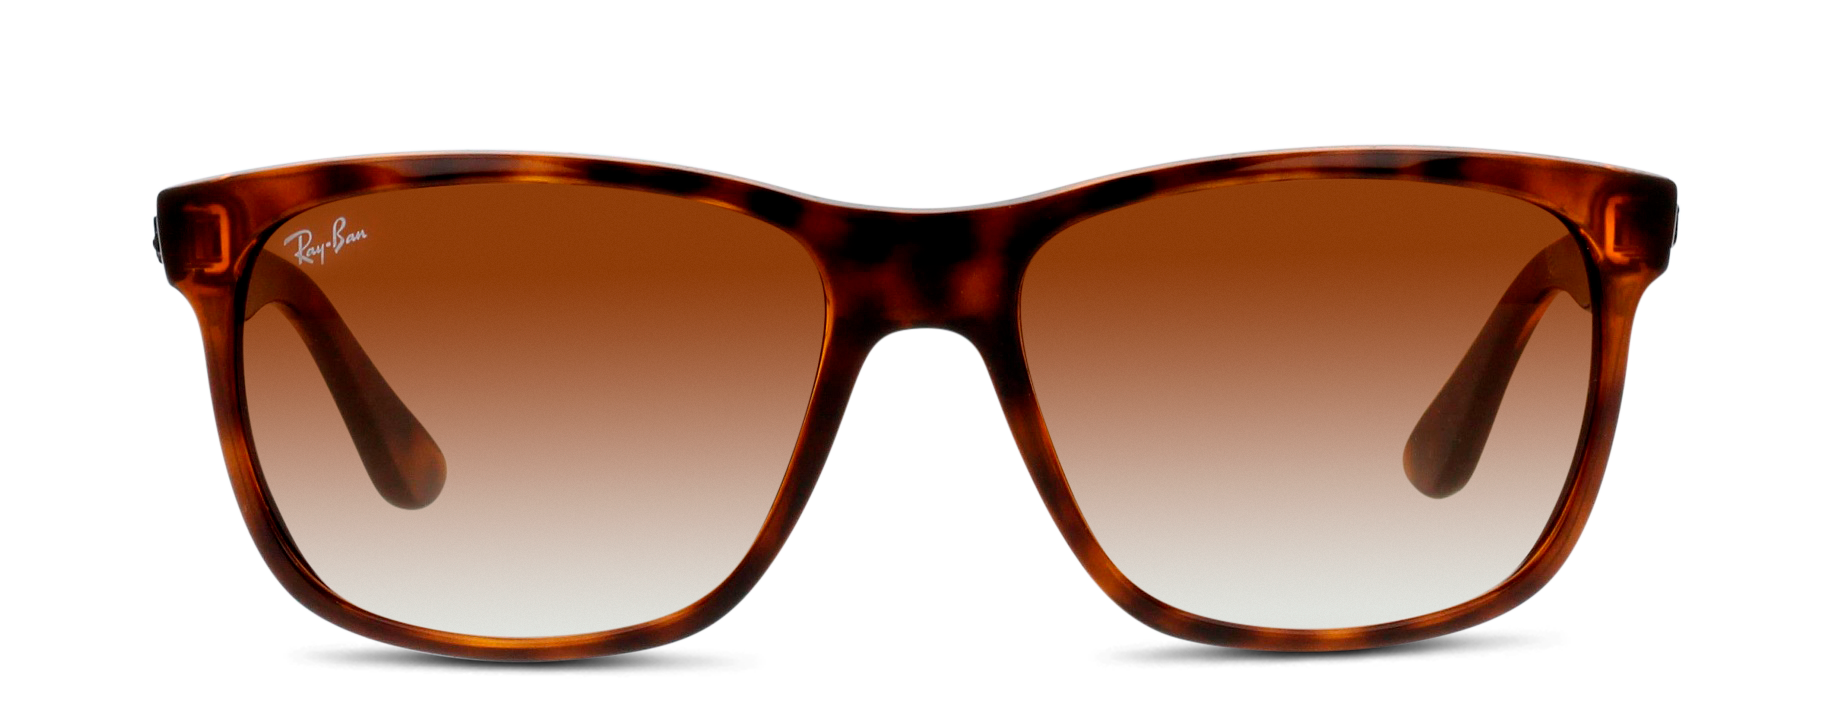 [products.image.front] Ray-Ban RB4181 710/51